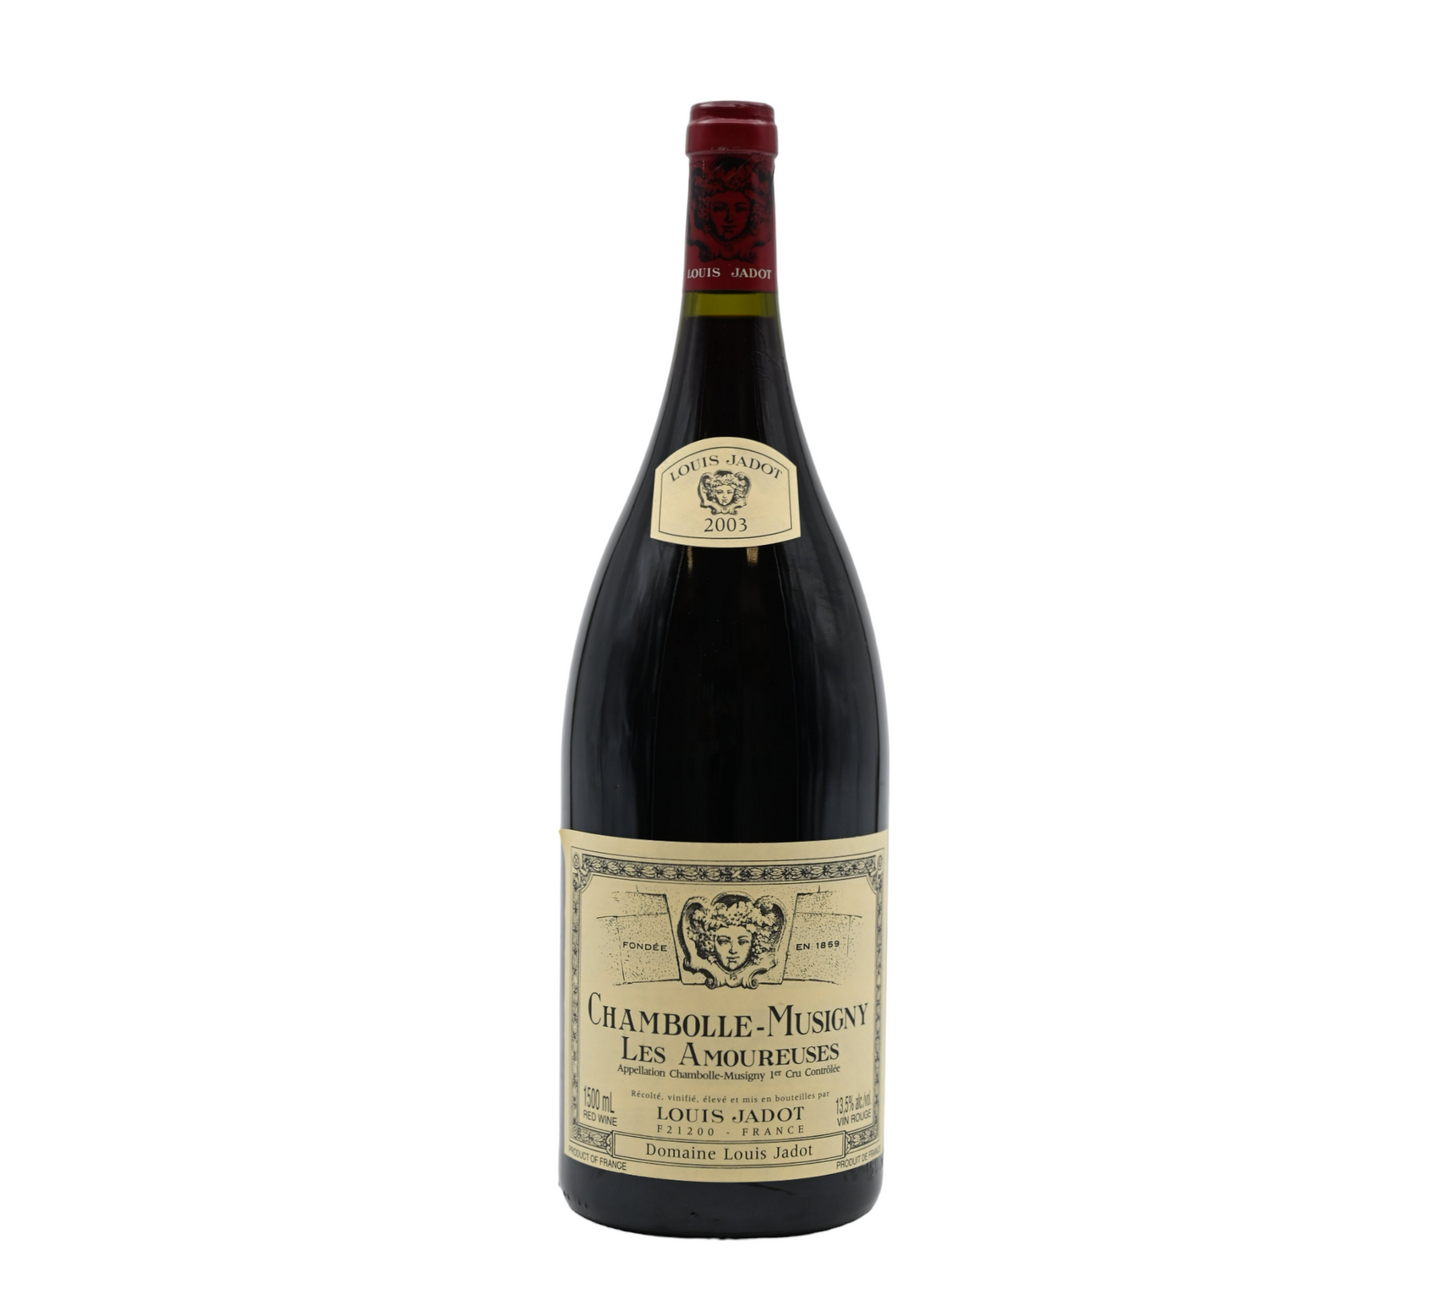 2003 Louis Jadot, Chambolle Musigny Les Amoureuses - Magnum 1.5L